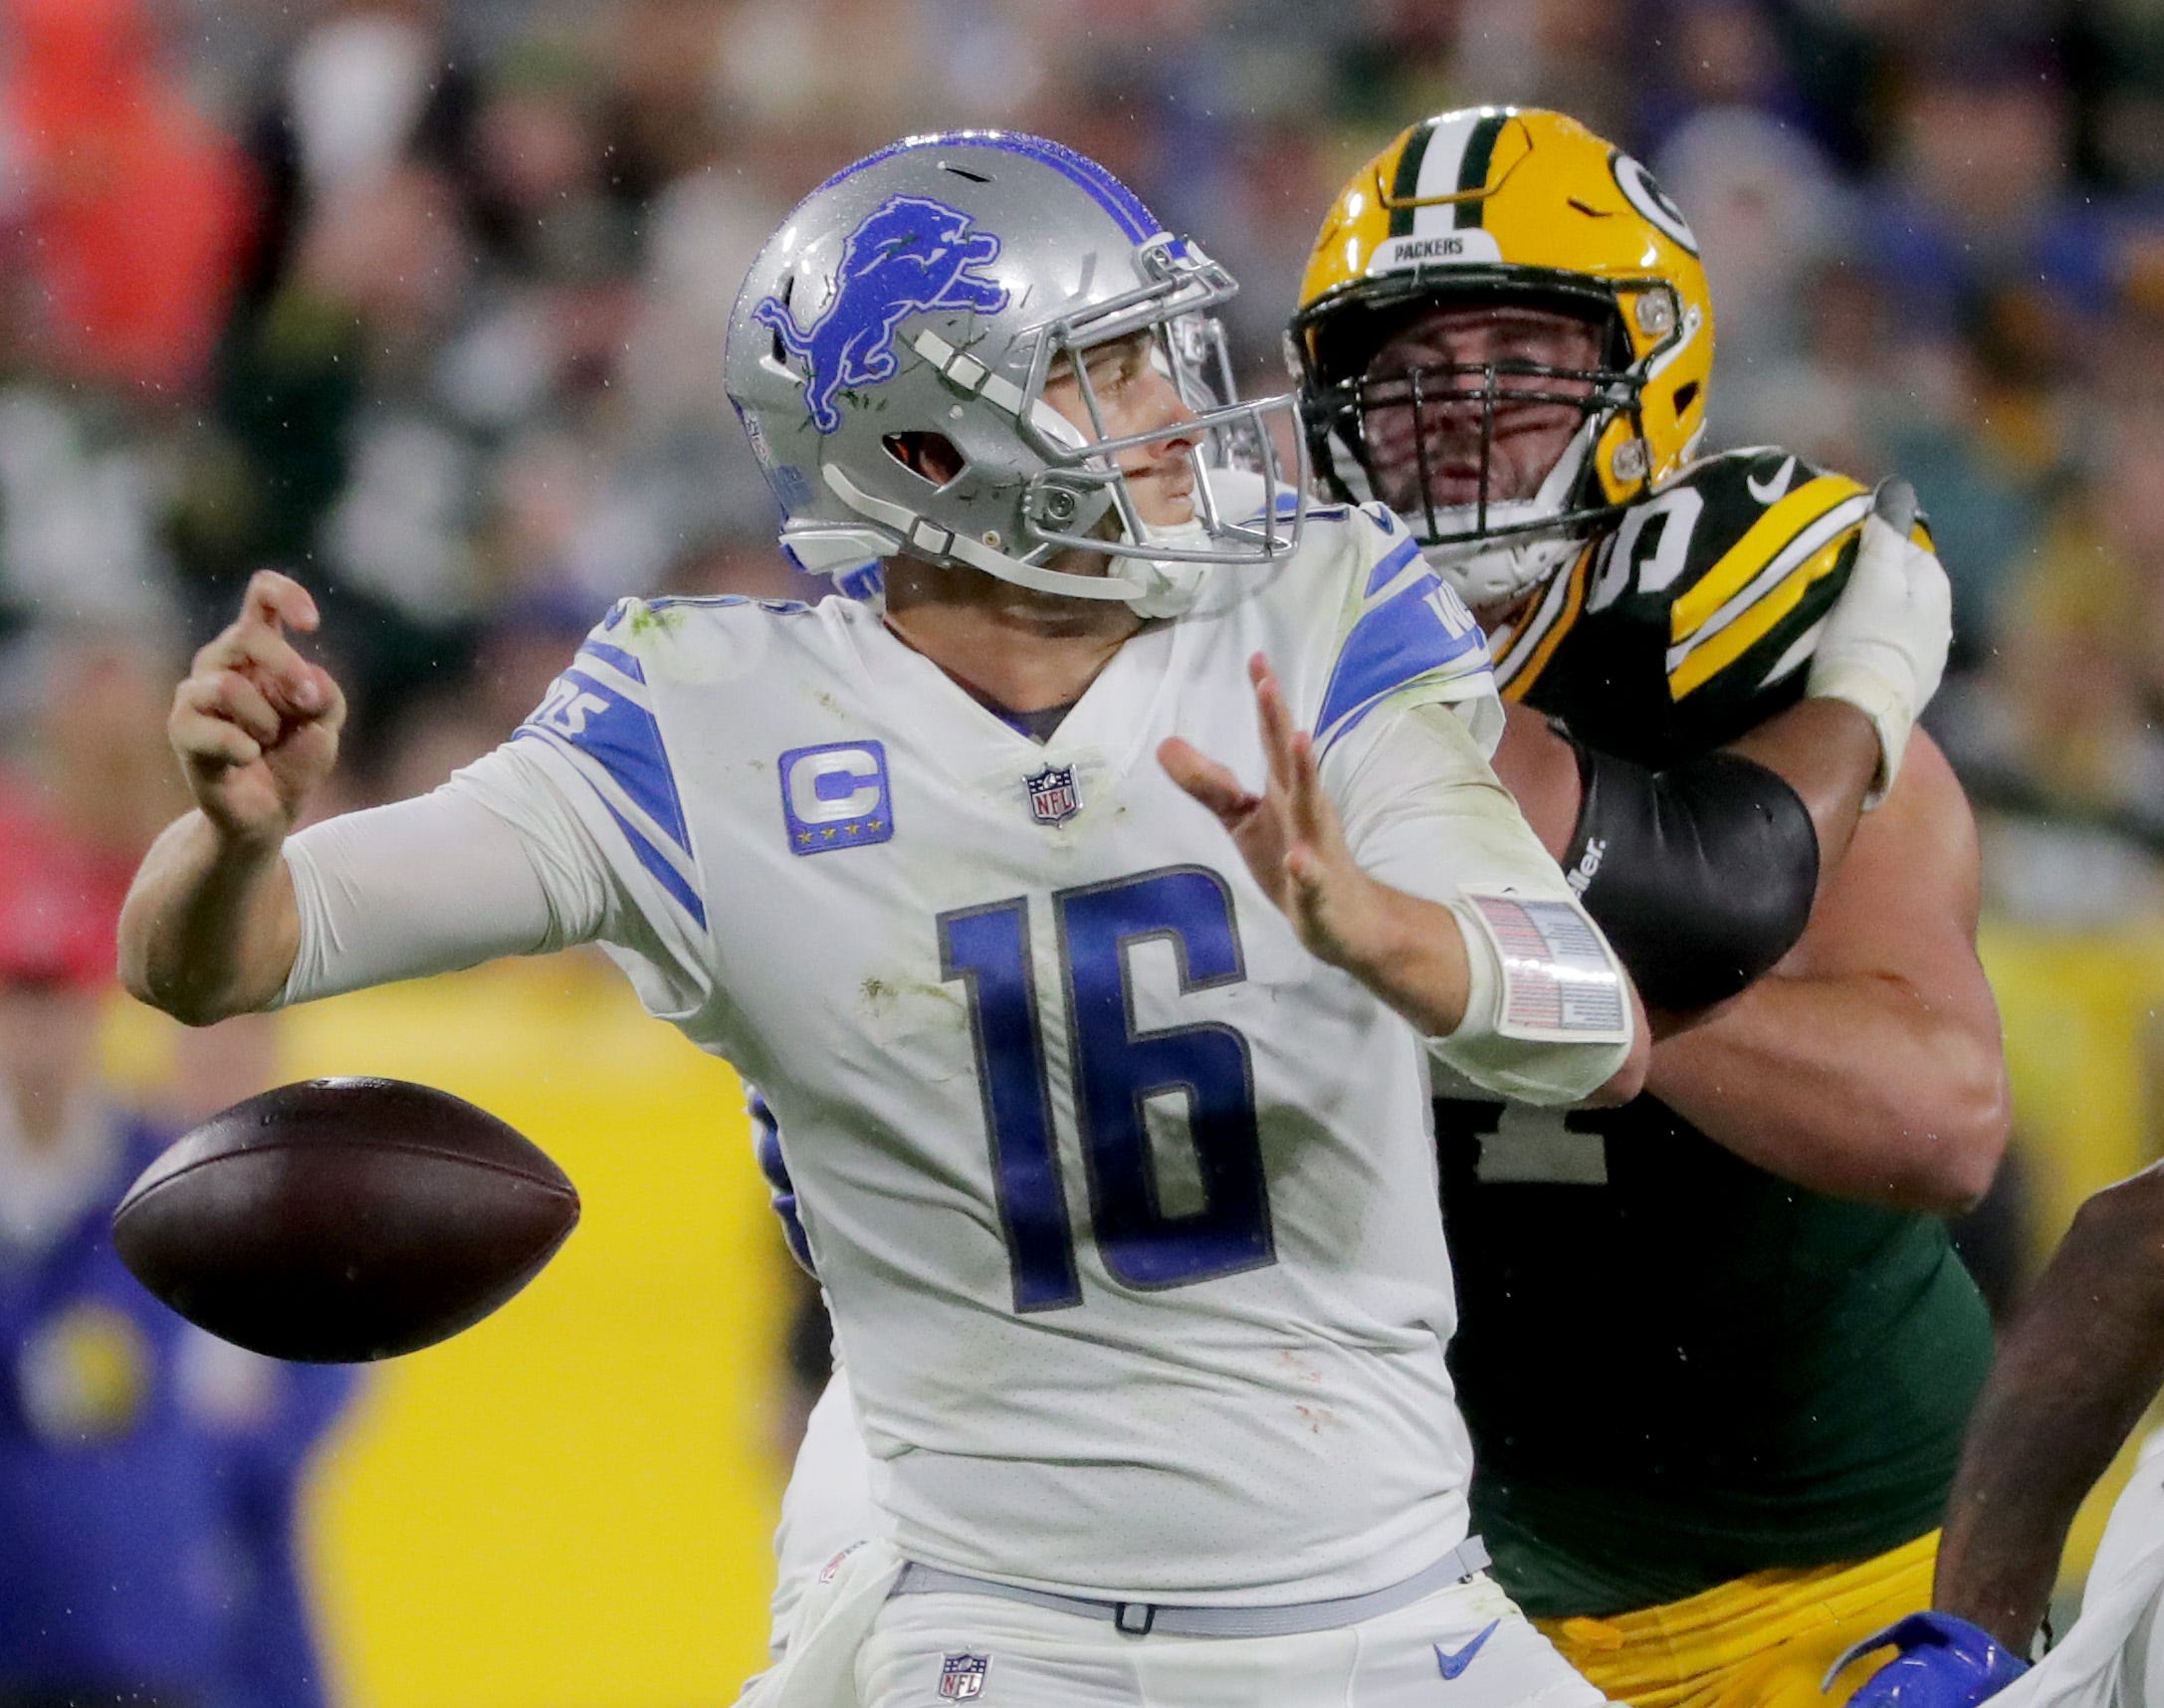 Detroit Lions quarterback Jared Goff fumbles the ball while being pressured by Green Bay Packers defensive end Dean Lowry (94)during the fourth quarter of their game Monday, September 20, 2021 at Lambeau Field in Green Bay, Wis. The Lions recovered the ball. The Green Bay Packers beat the Detroit Lions 35-17.